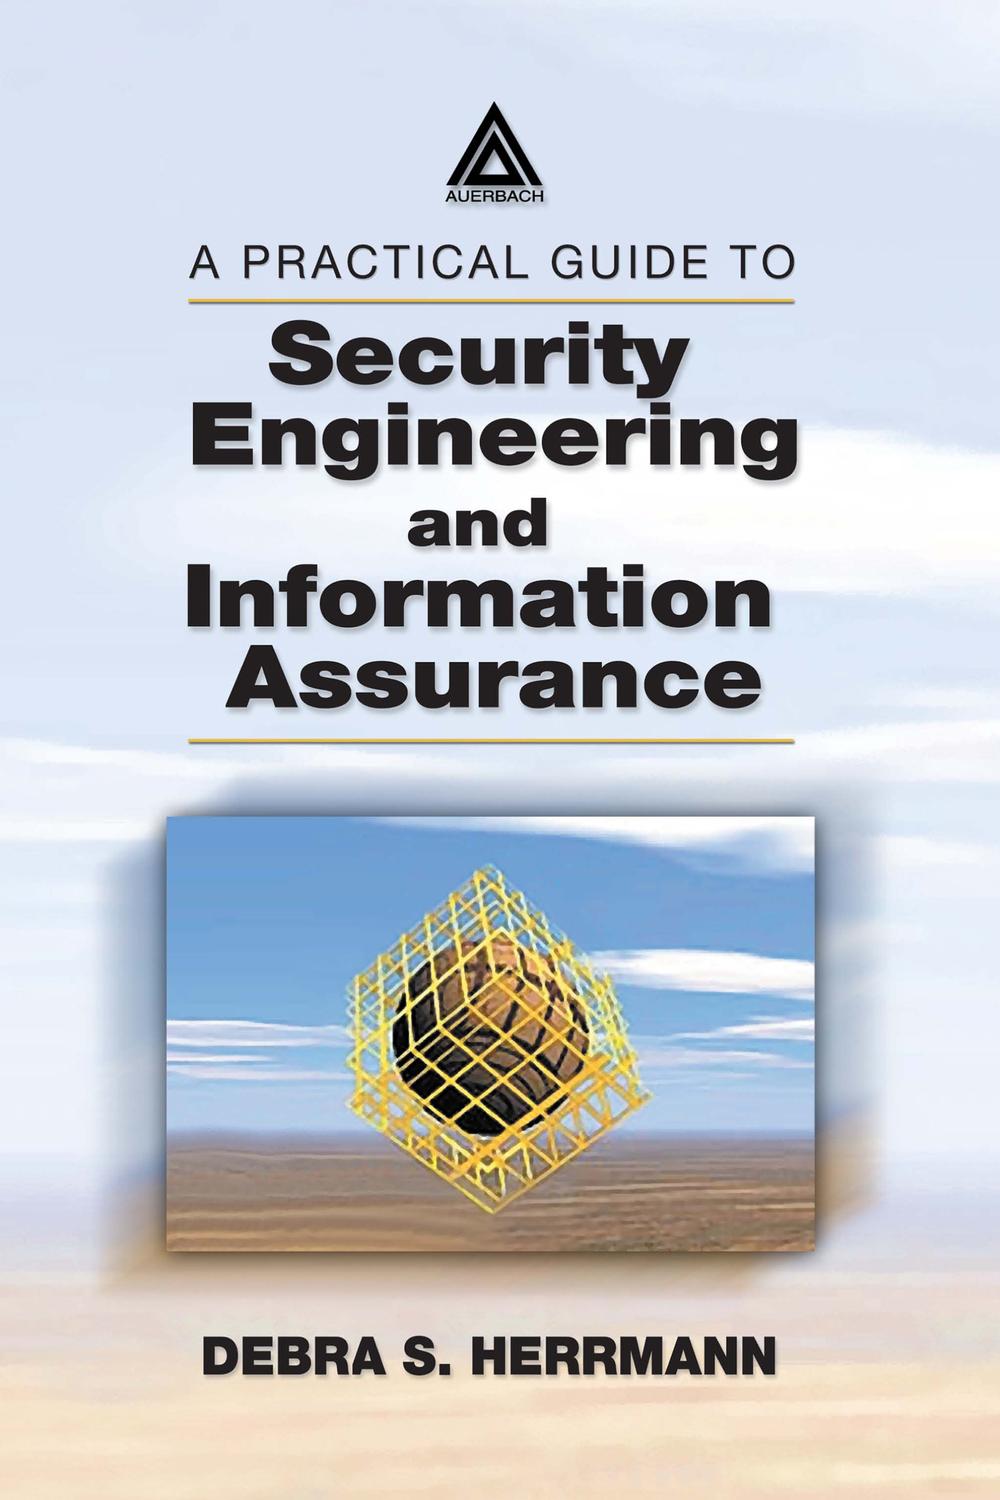 A Practical Guide to Security Engineering and Information Assurance - Debra S. Herrmann